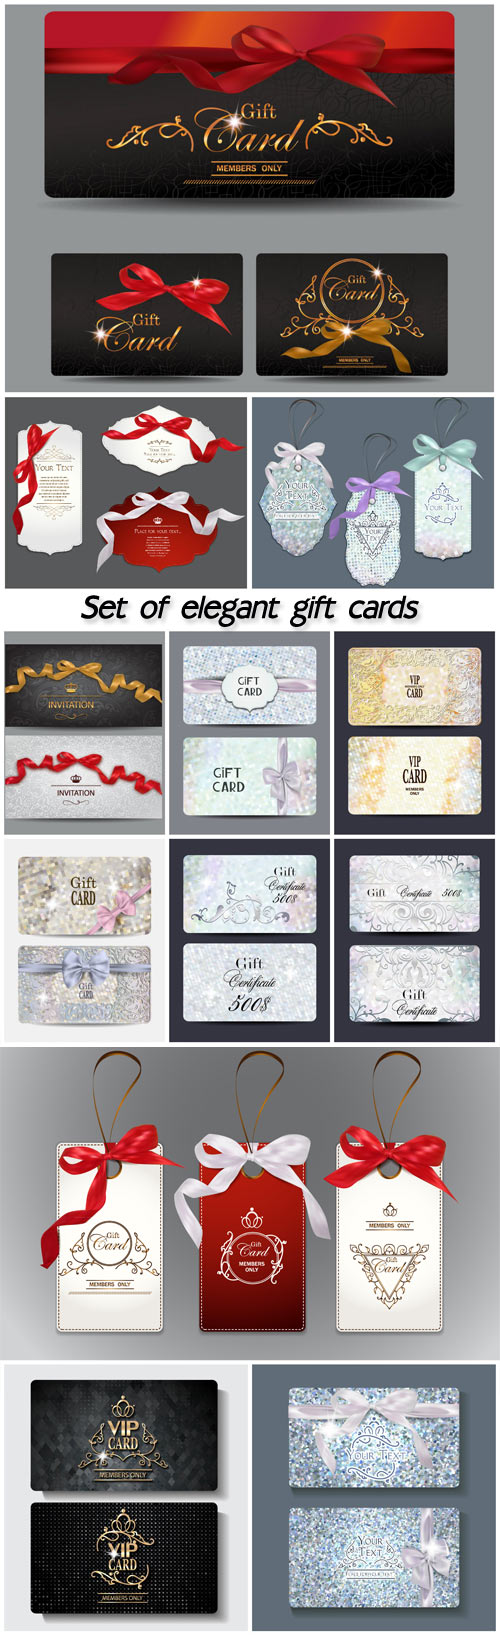 Set of elegant gift cards with gold lettering and silk ribbons